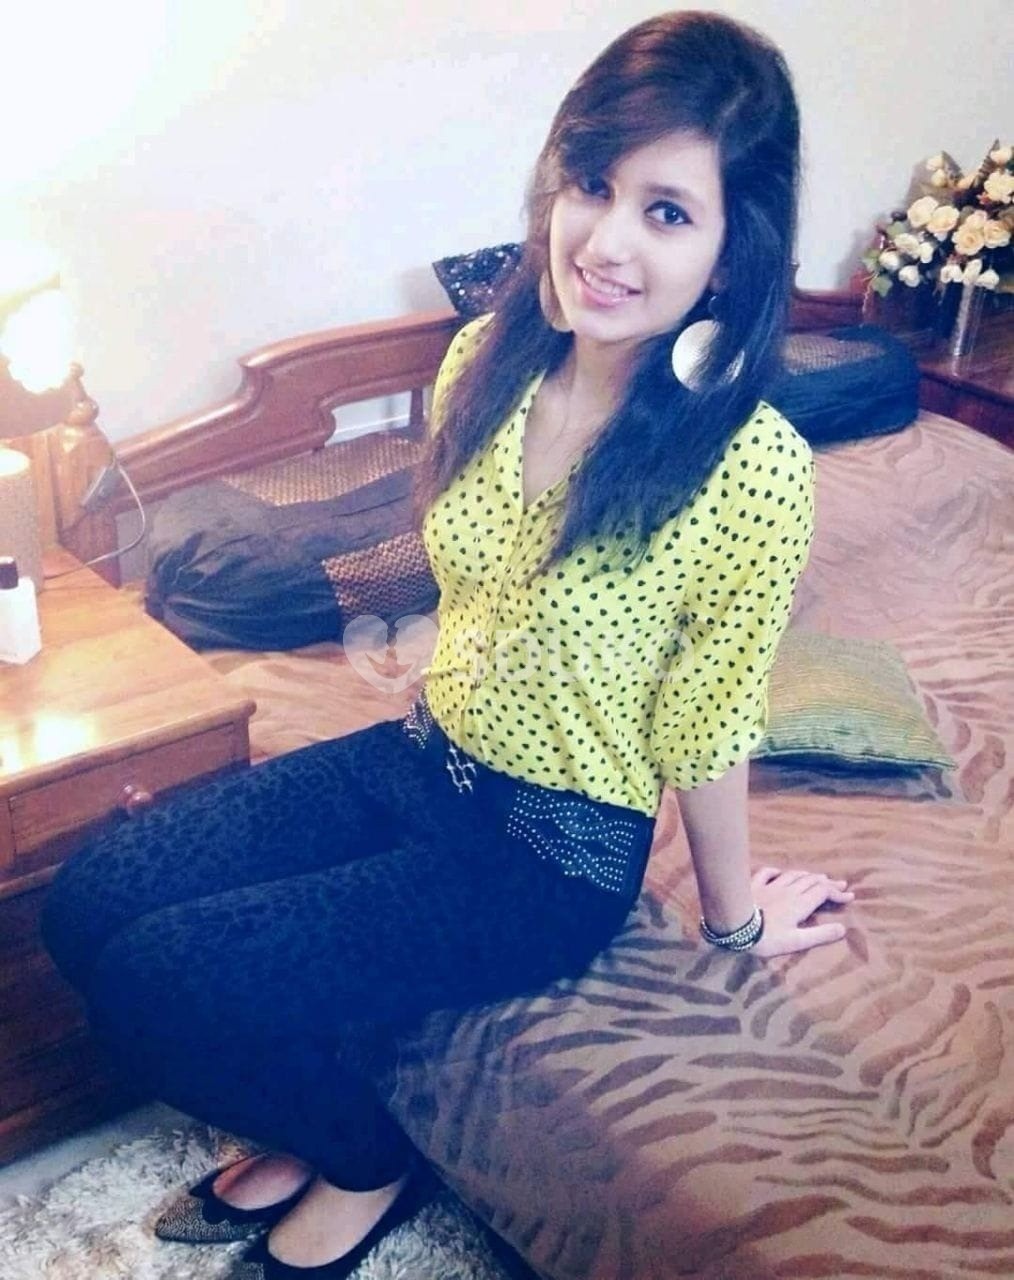 Bangalore independent escorts affordable cheapest price all type satisfaction incall outcall facilities available